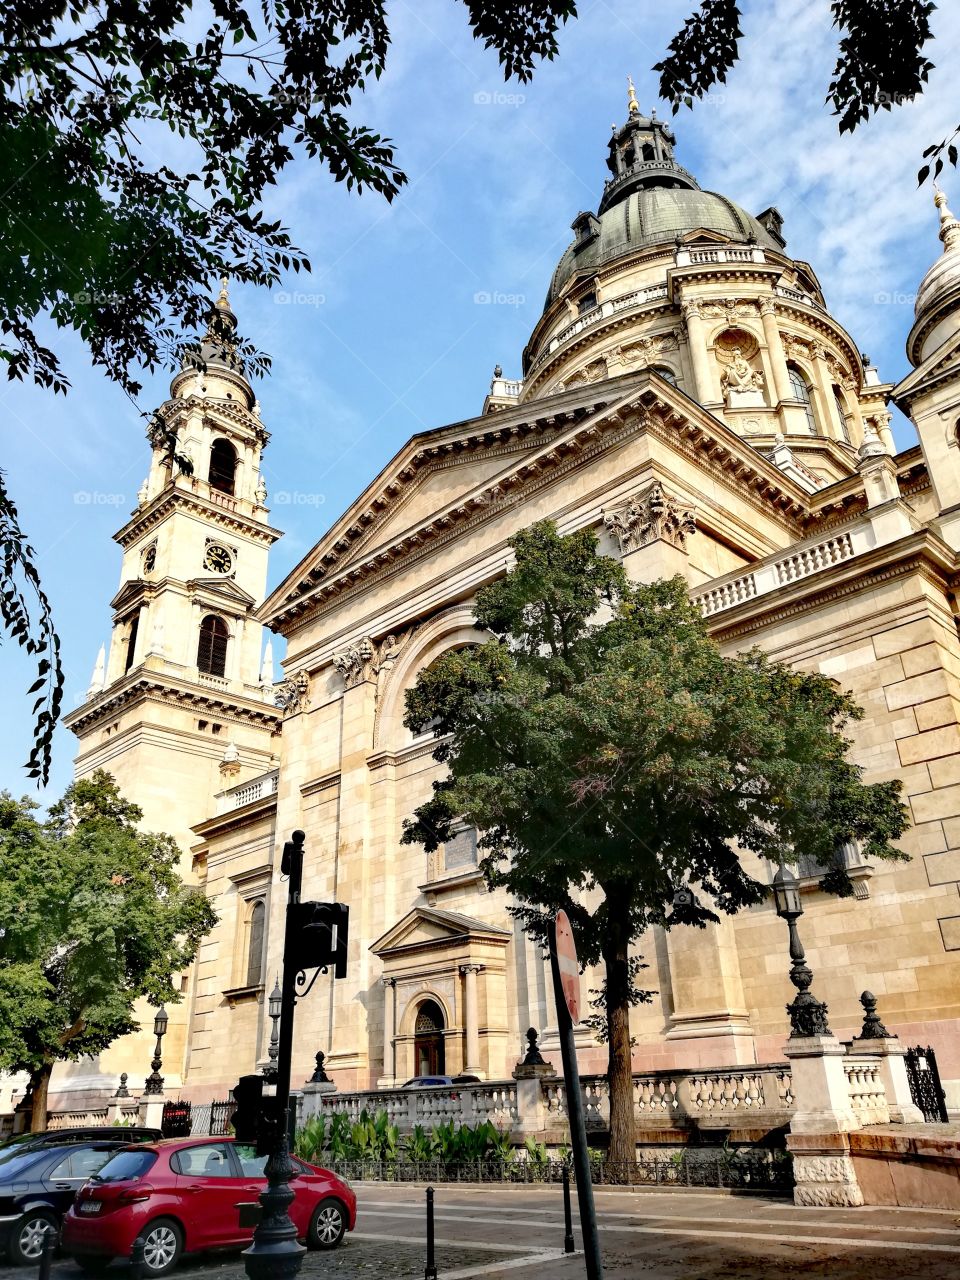 St. Stephen's Basilica from a one side